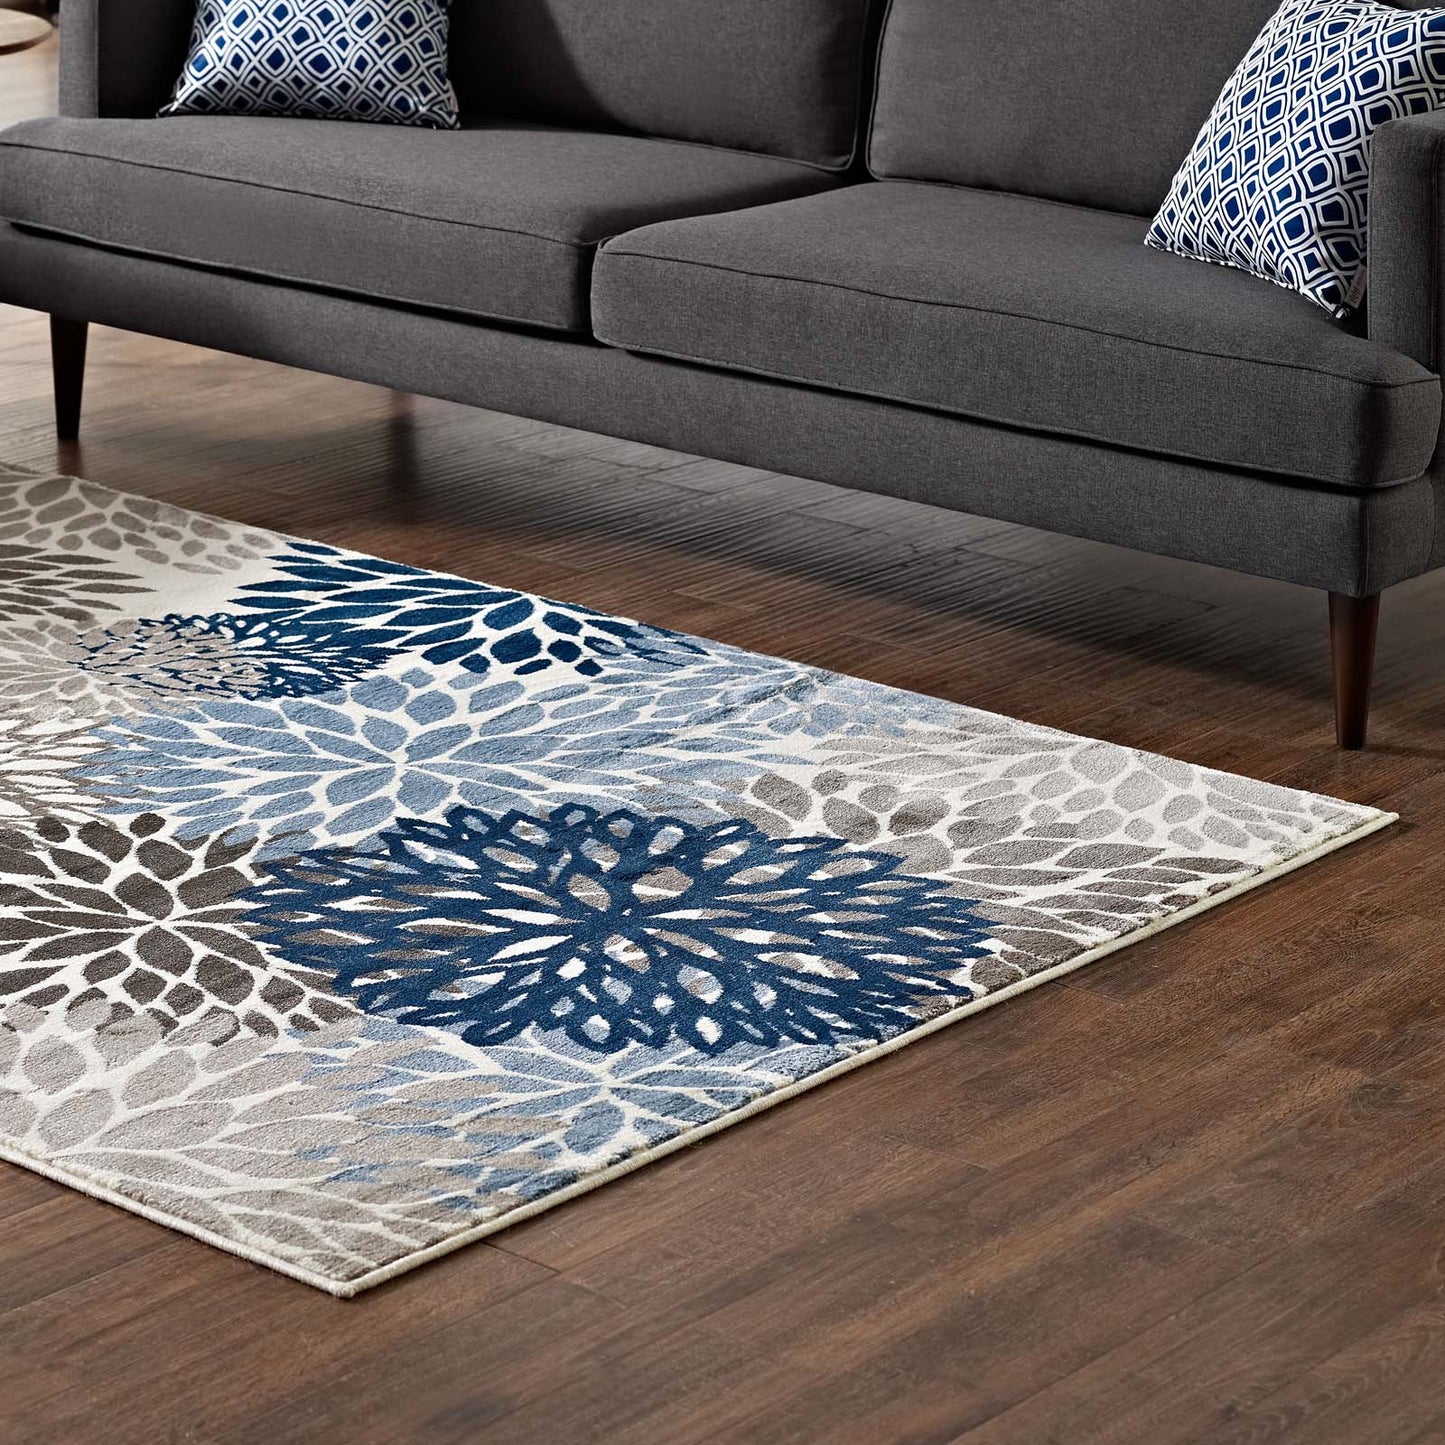 Calithea Vintage Classic Abstract Floral 5x8  Area Rug Blue, Brown and Beige R-1133A-58